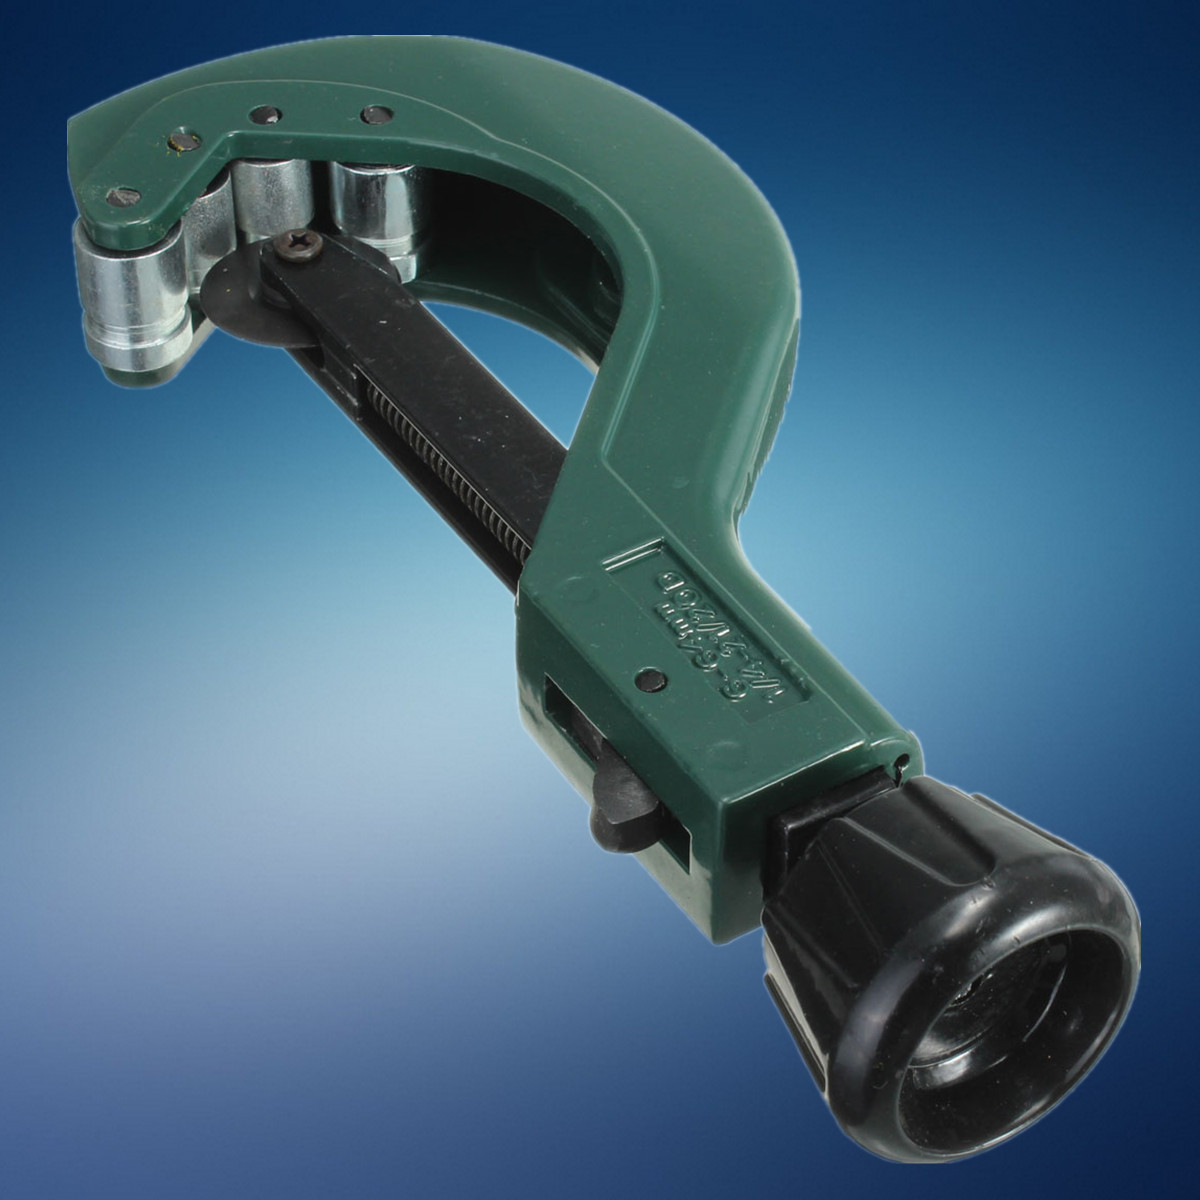 6-64mm-Heavy-Duty-Silverline-Plumbers-Quick-Release-Tube-Pipe-Cutter-Tool-1041481-9